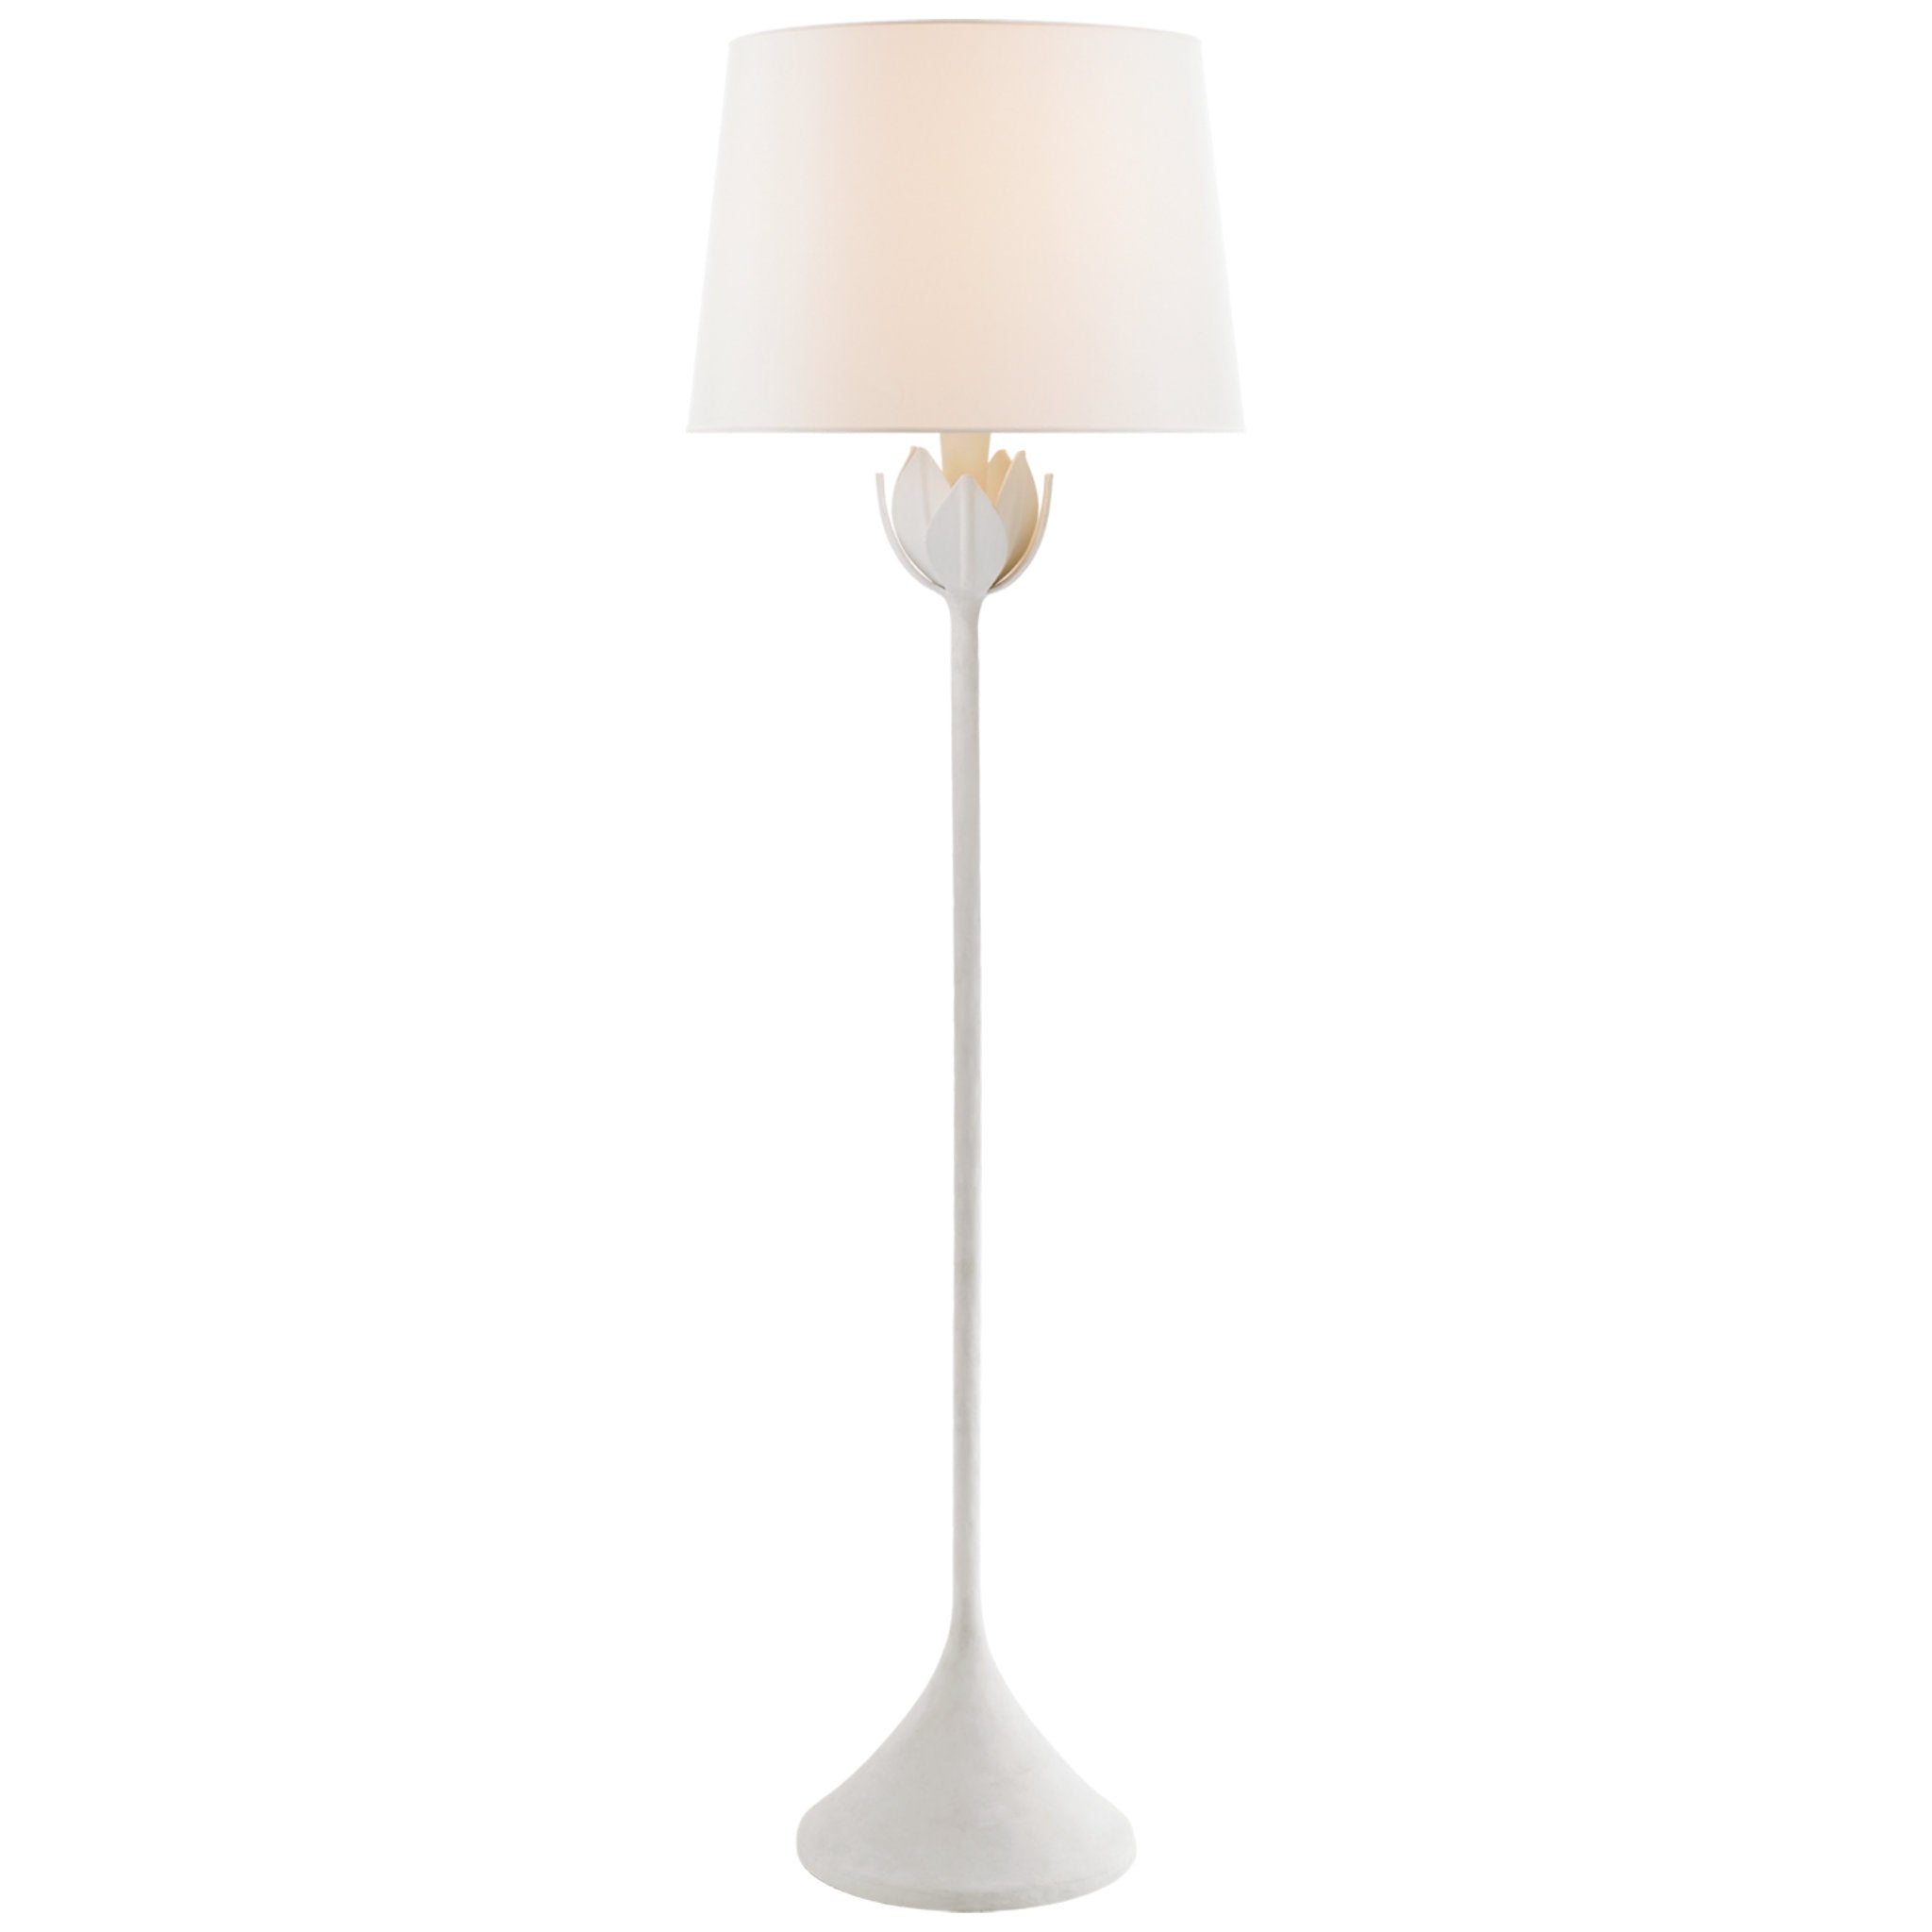 Julie Neill Alberto Large Floor Lamp in Plaster White with Linen Shade